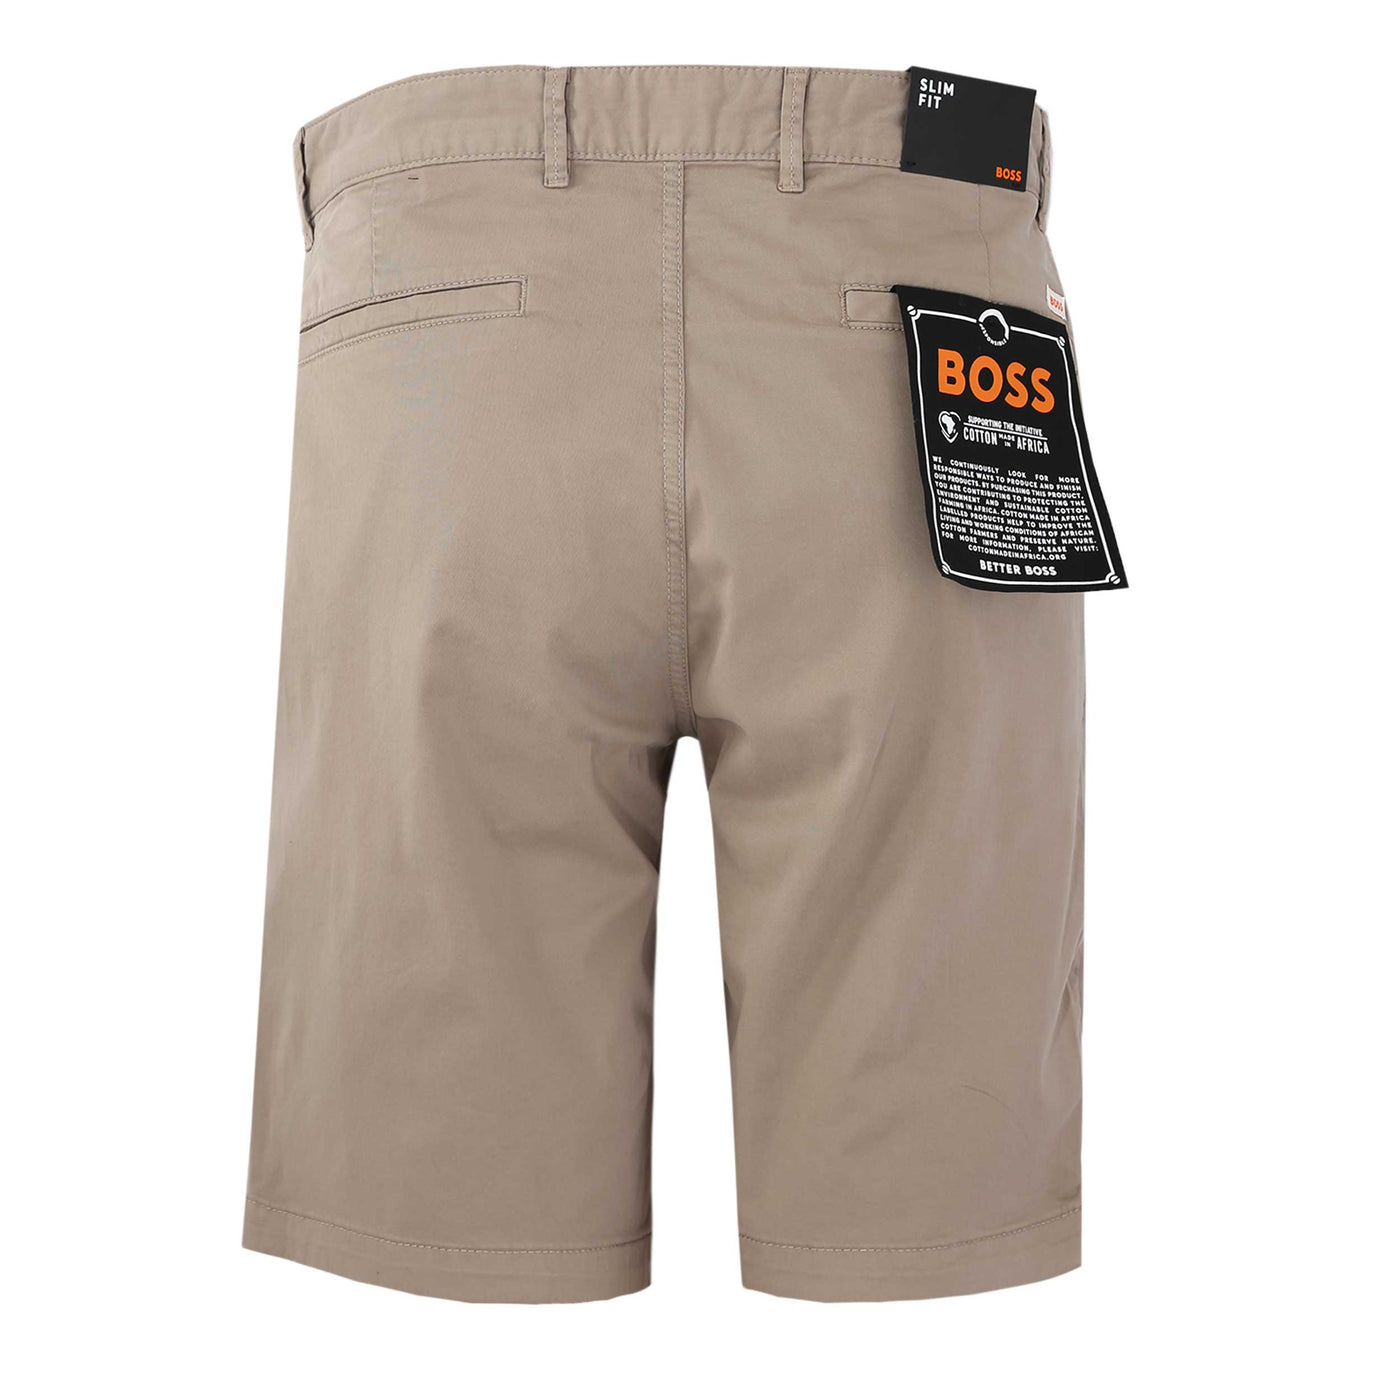 BOSS Chino Slim Shorts in Open Brown Back